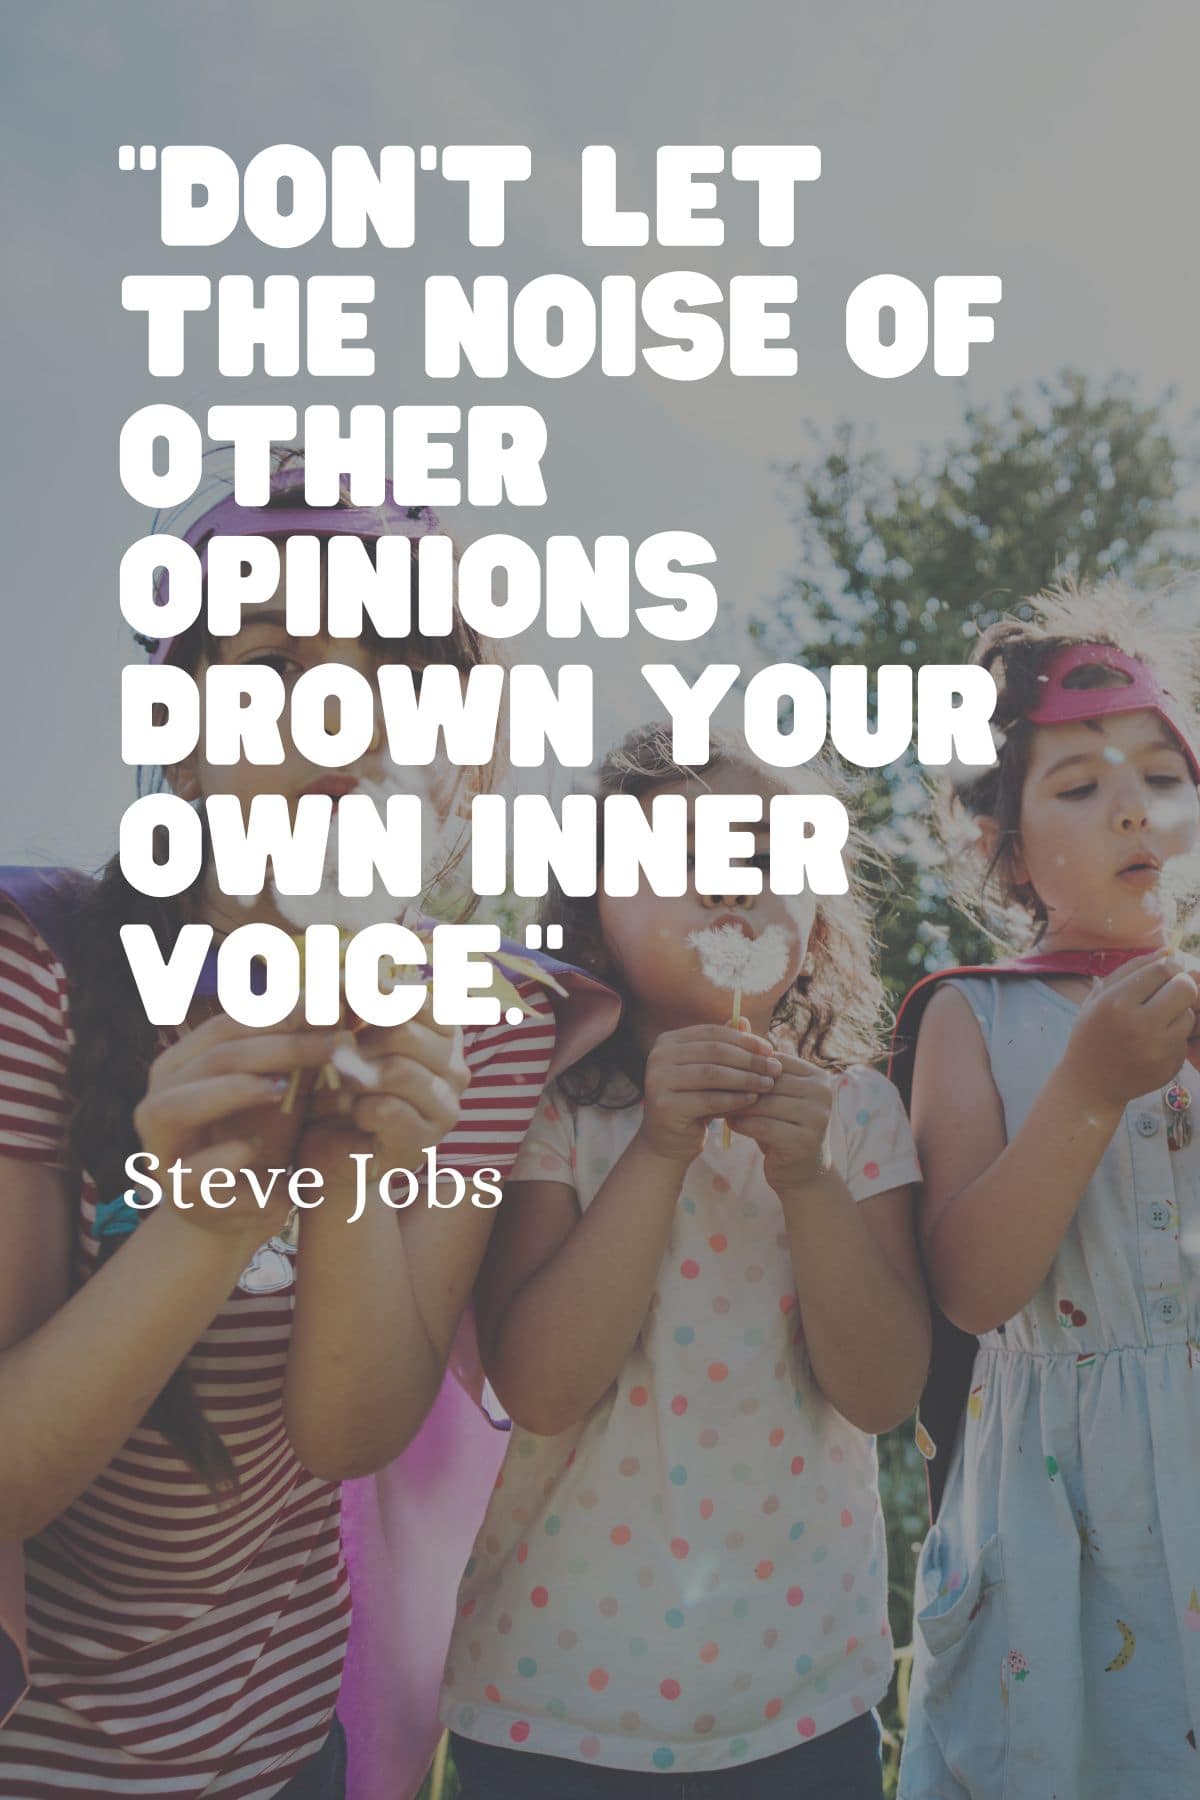 “Don’t let the noise of other opinions drown your own inner voice.” – Steve Jobs quote for kids